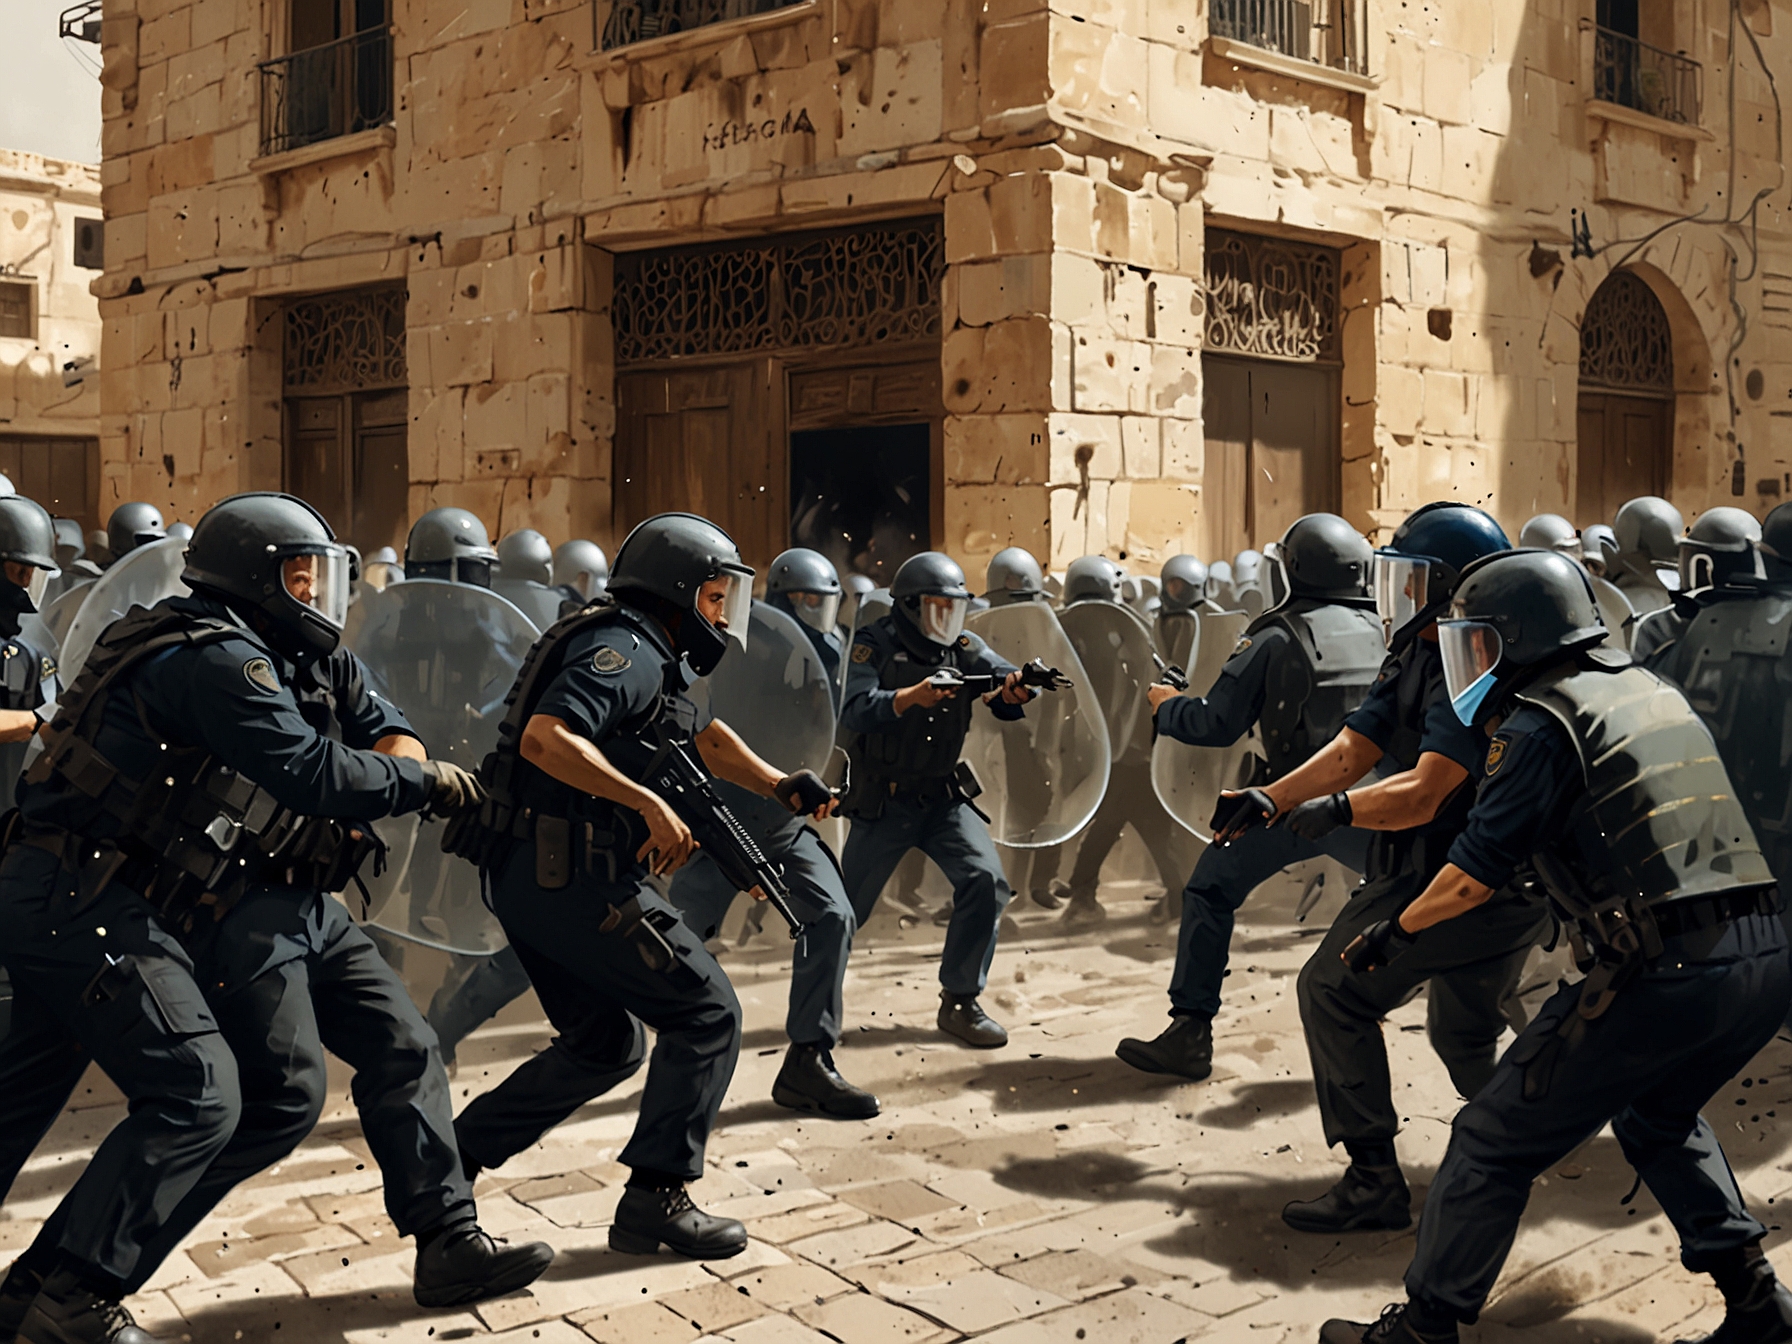 Clashes between police and anti-government protesters in Jerusalem, with law enforcement using heavy-handed tactics, highlighting the escalating tensions and international concern.